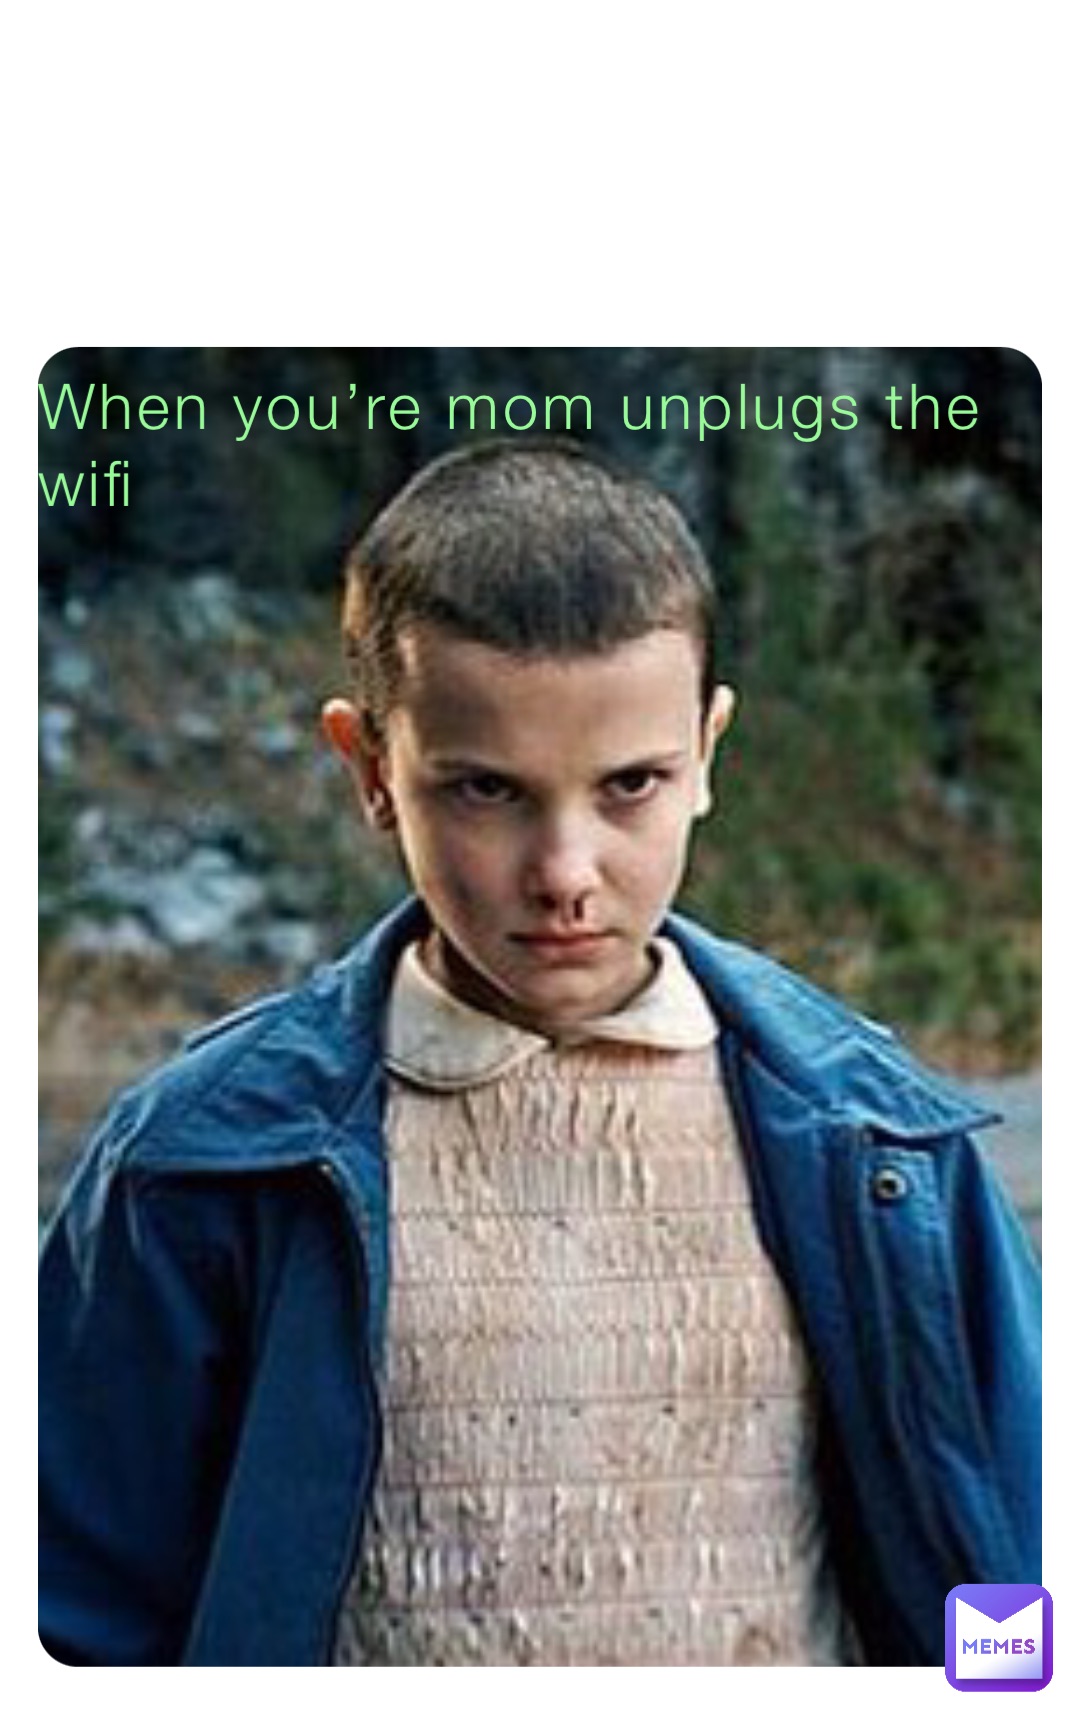 When you’re mom unplugs the wifi